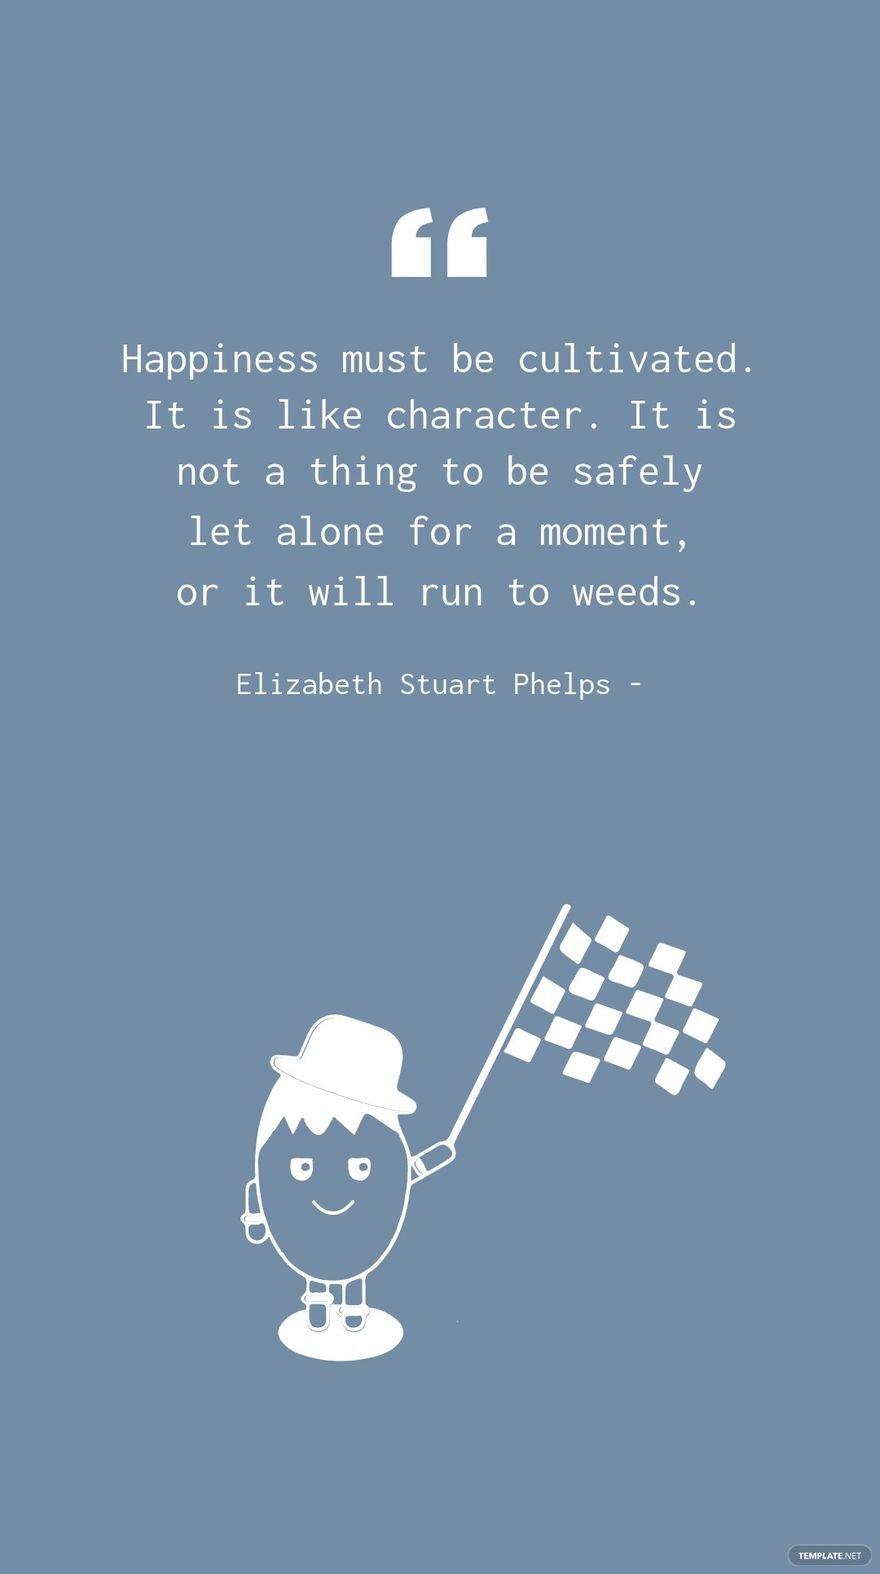 Elizabeth Stuart Phelps - Happiness must be cultivated. It is like character. It is not a thing to be safely let alone for a moment, or it will run to weeds. in JPG